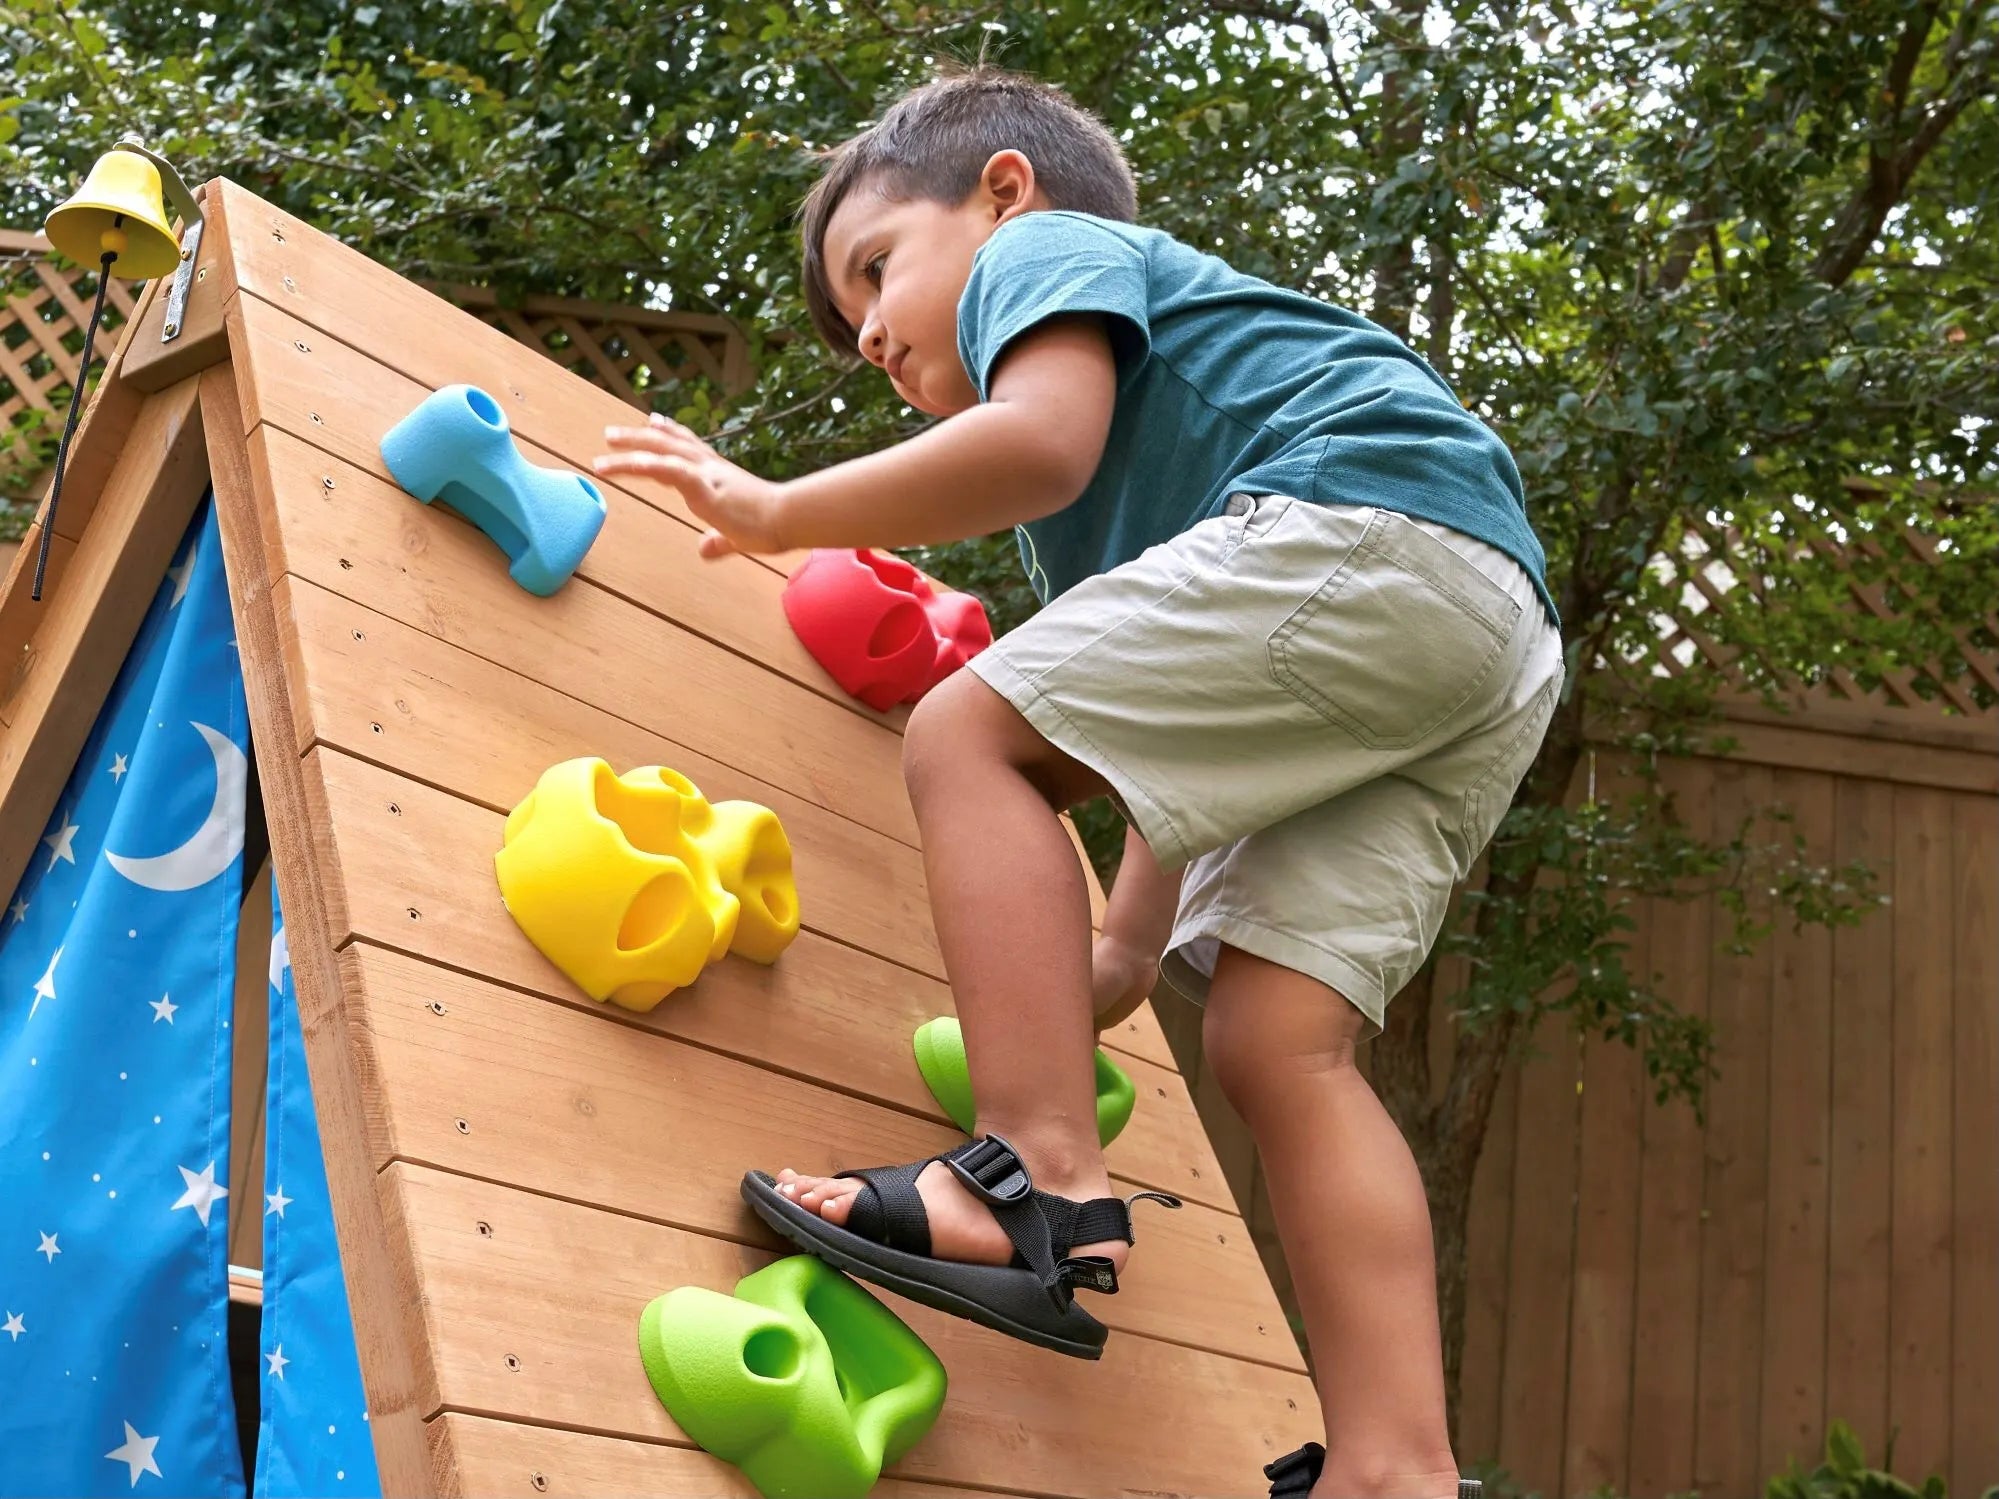 Is Climbing a Gross Motor Skill? And is it Essential for Your Child's Development?